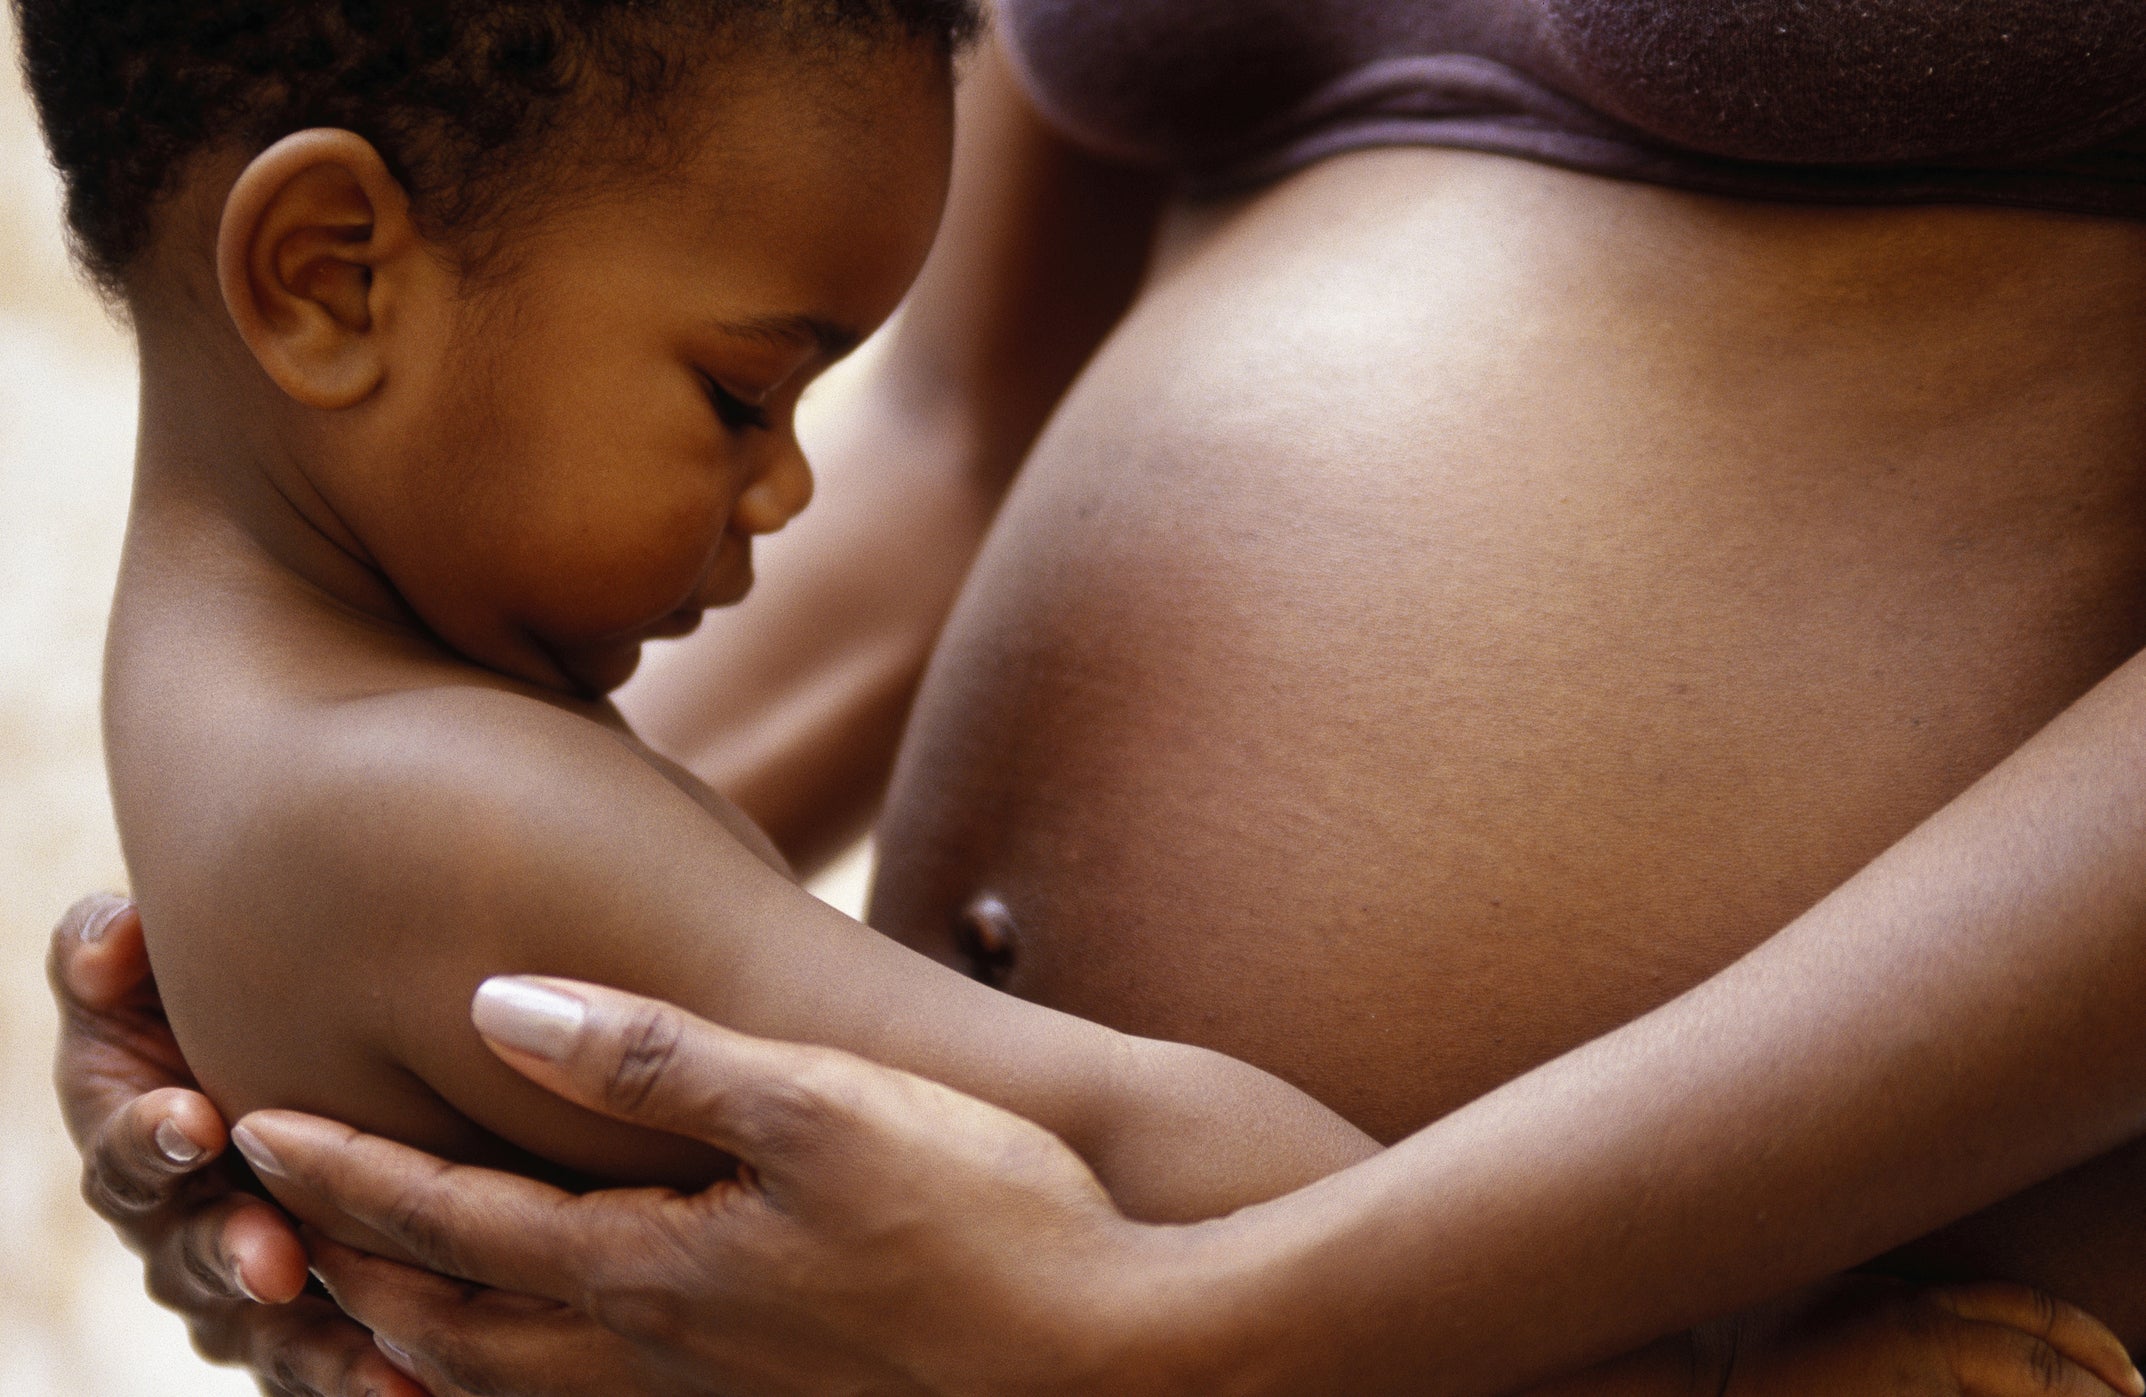 We Can’t Let Up The Fight To End The Black Maternal Health Crisis, Especially Right Now